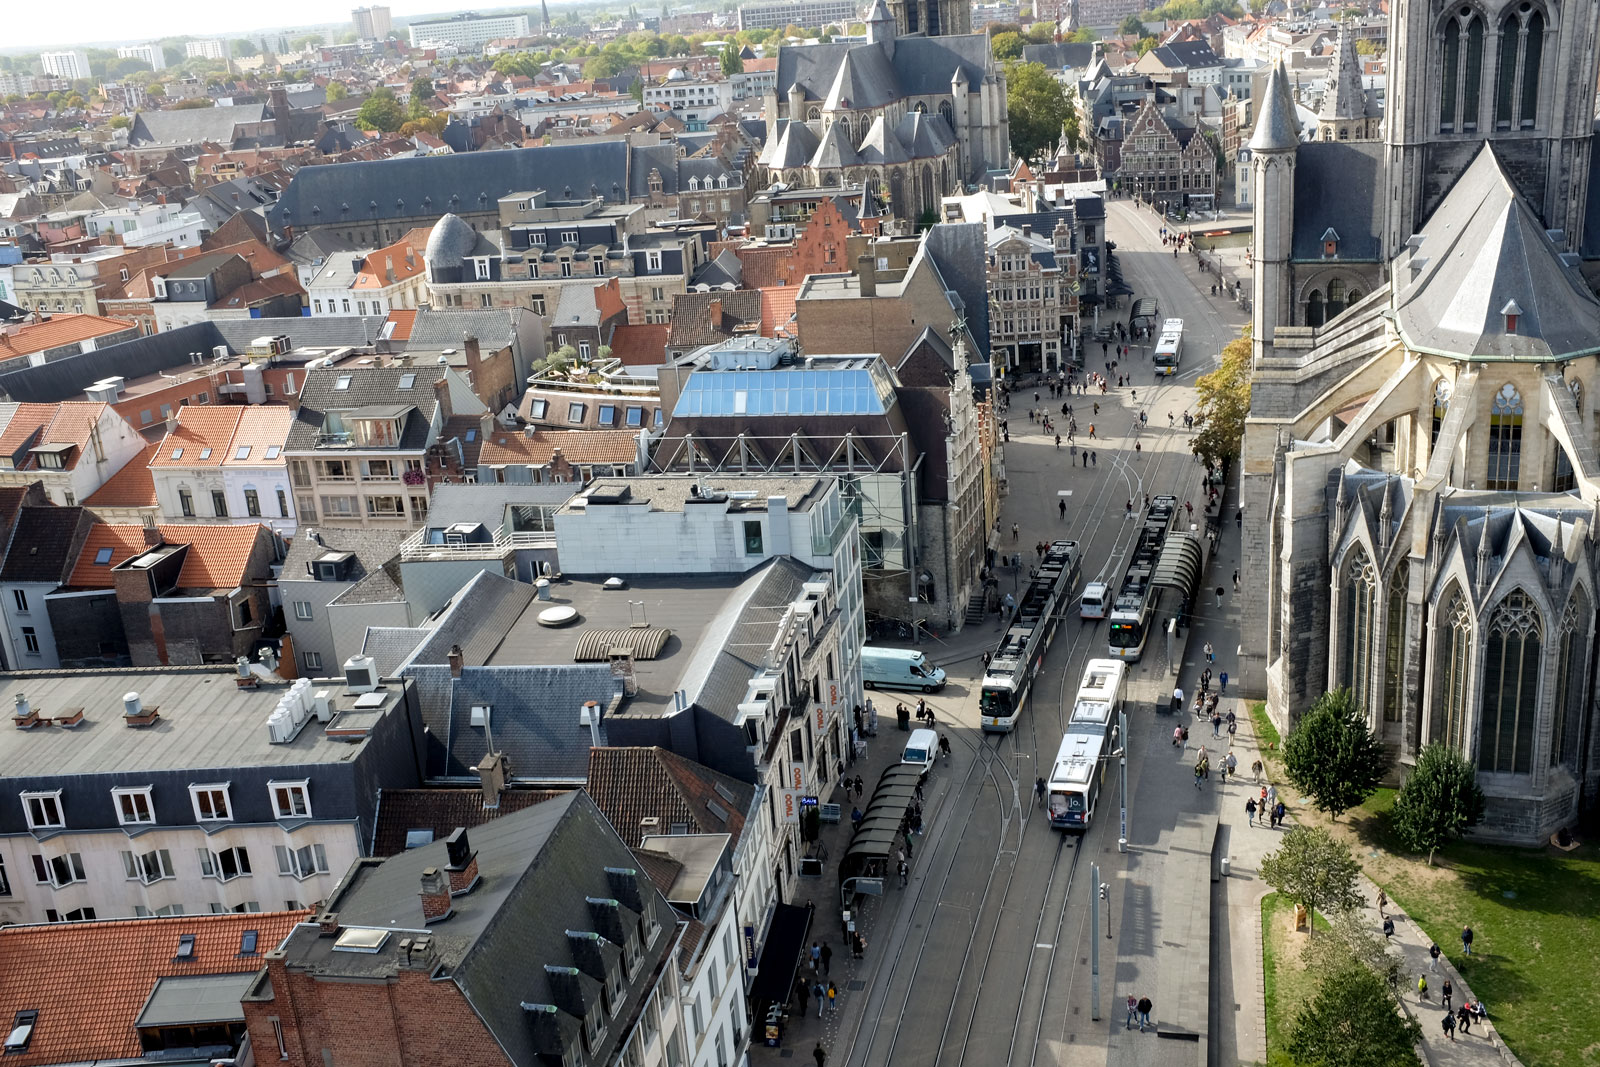 View of trams and city streets below taken from the Ghent Belfry